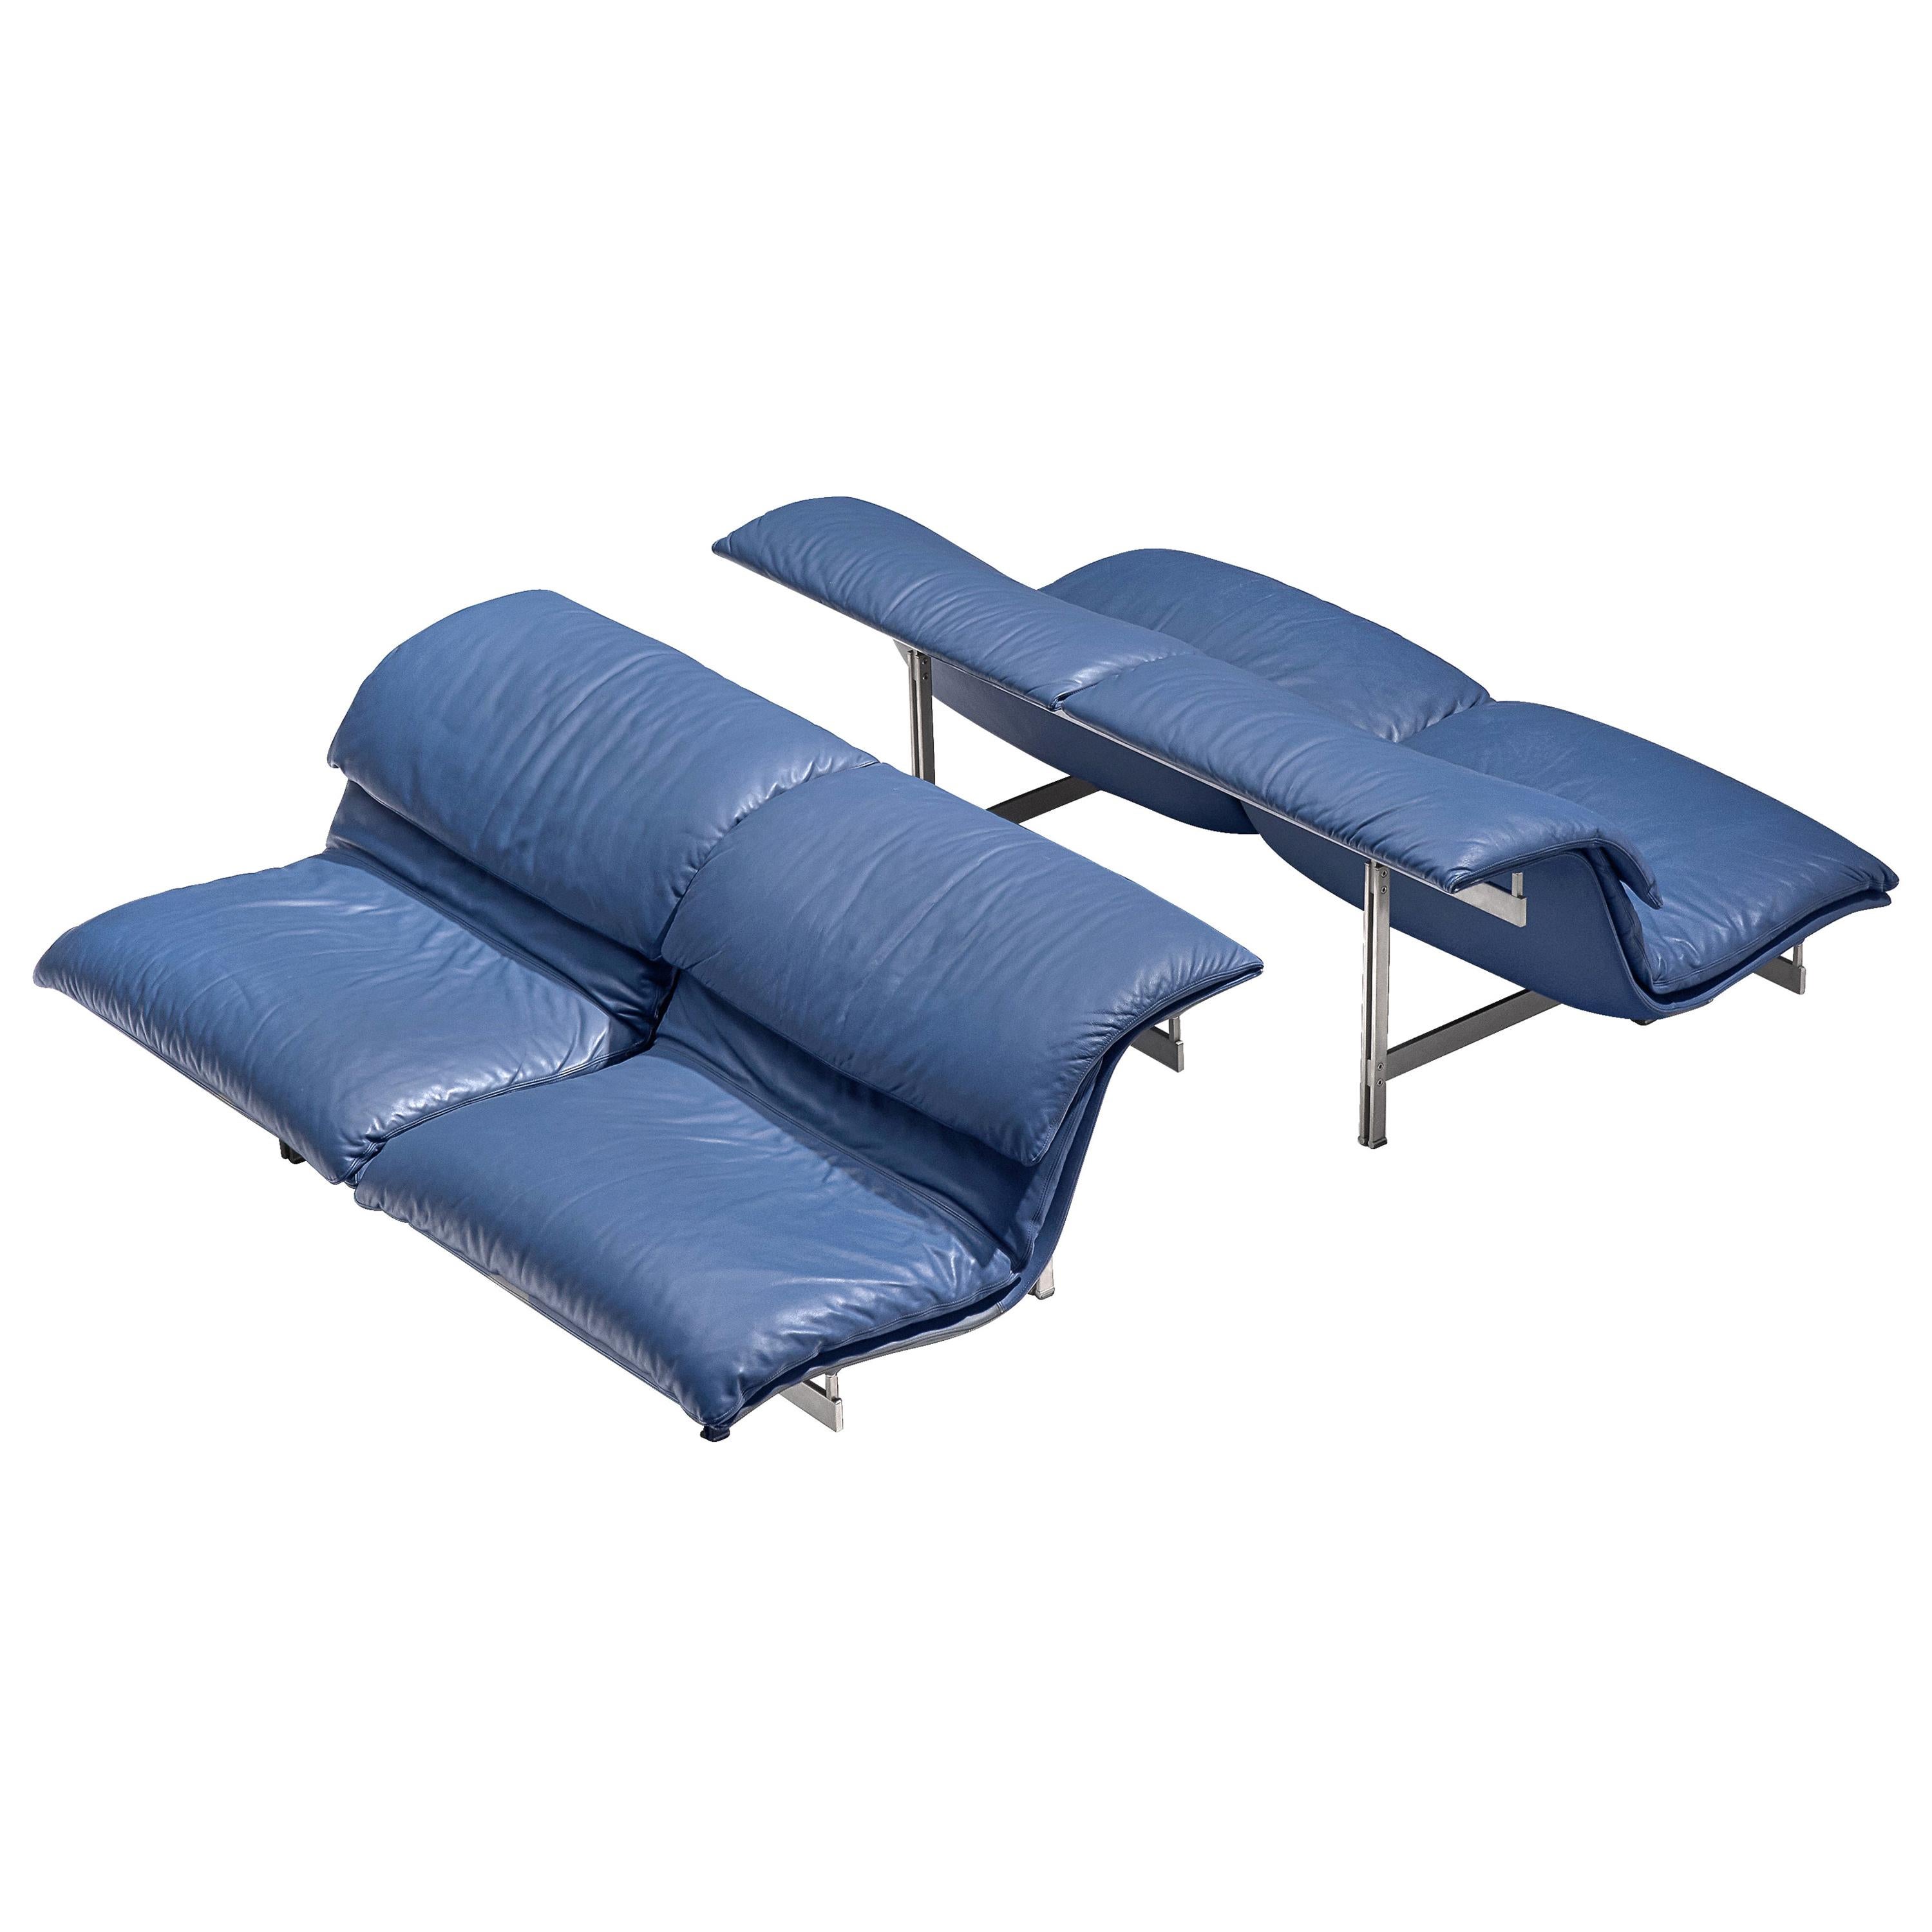 Giovanni Offredi for Saporiti Pair of 'Wave' Sofas in Sapphire Blue Leather 